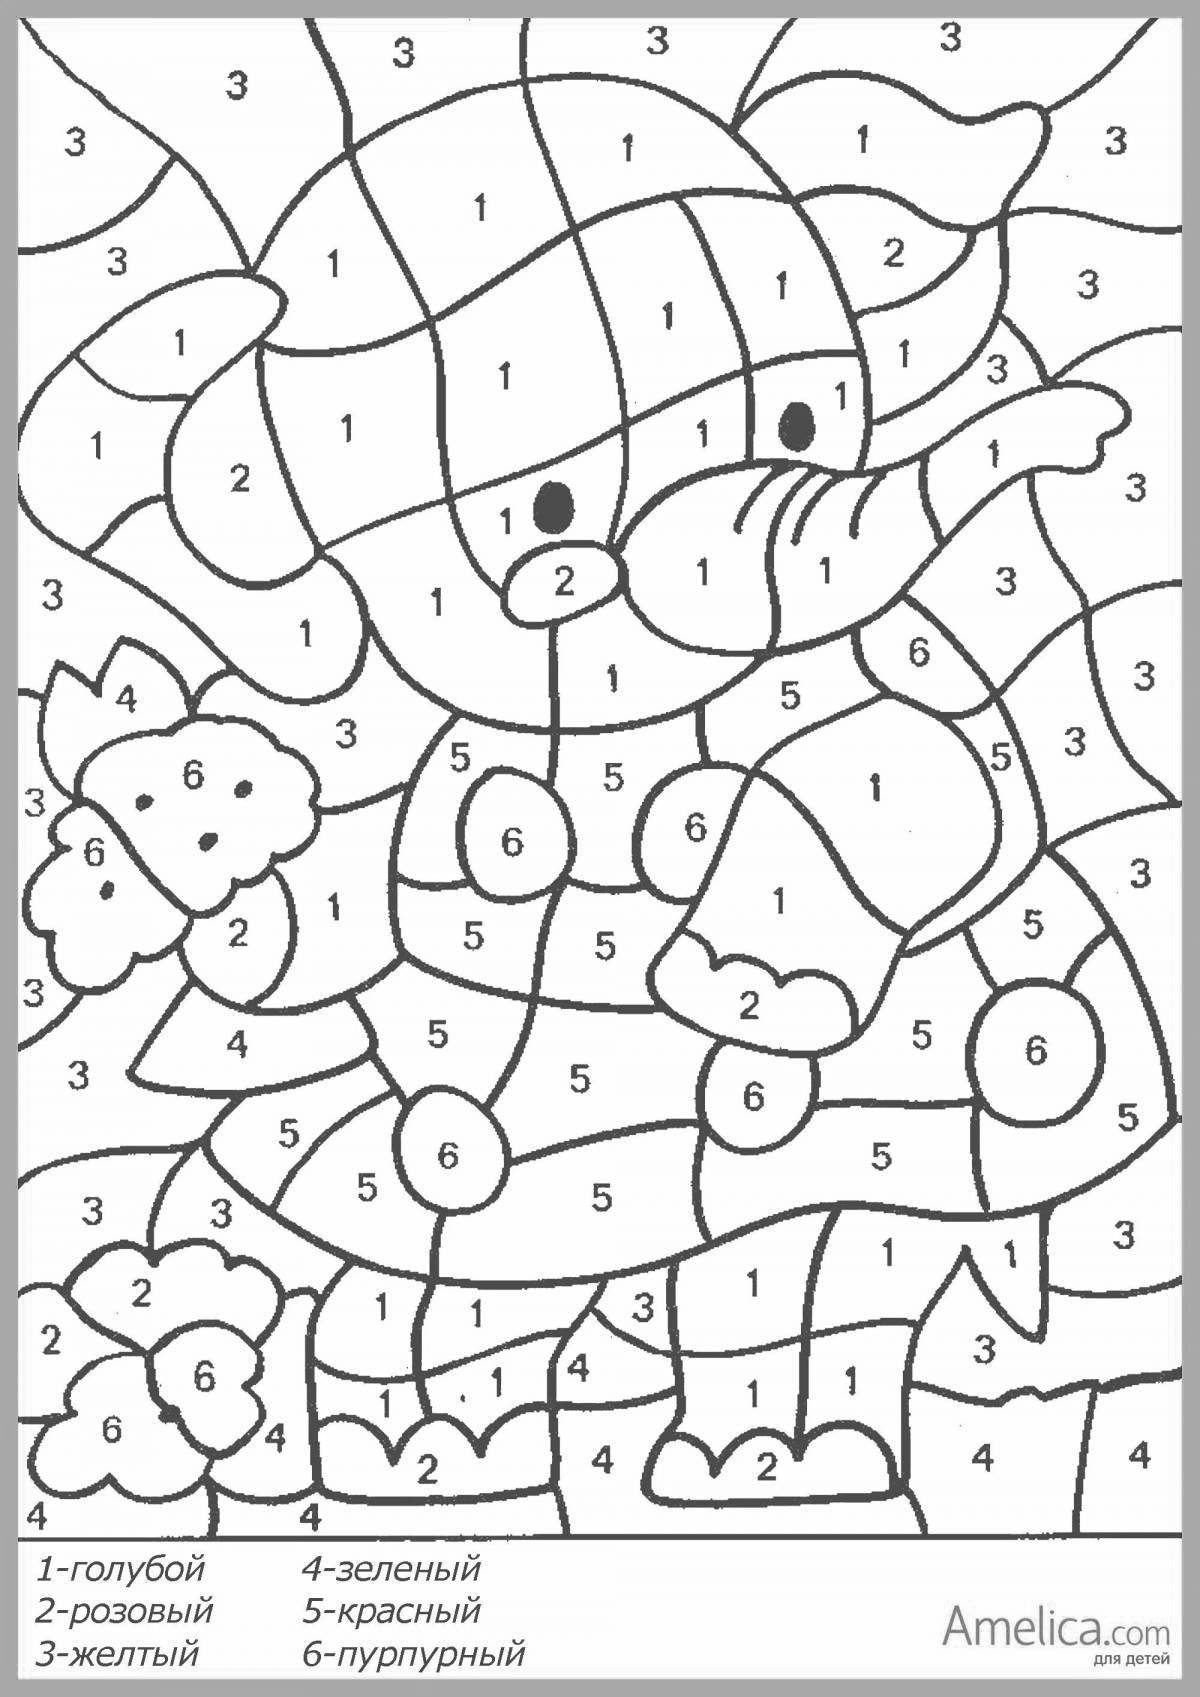 Joyful coloring by numbers for children 5 years old